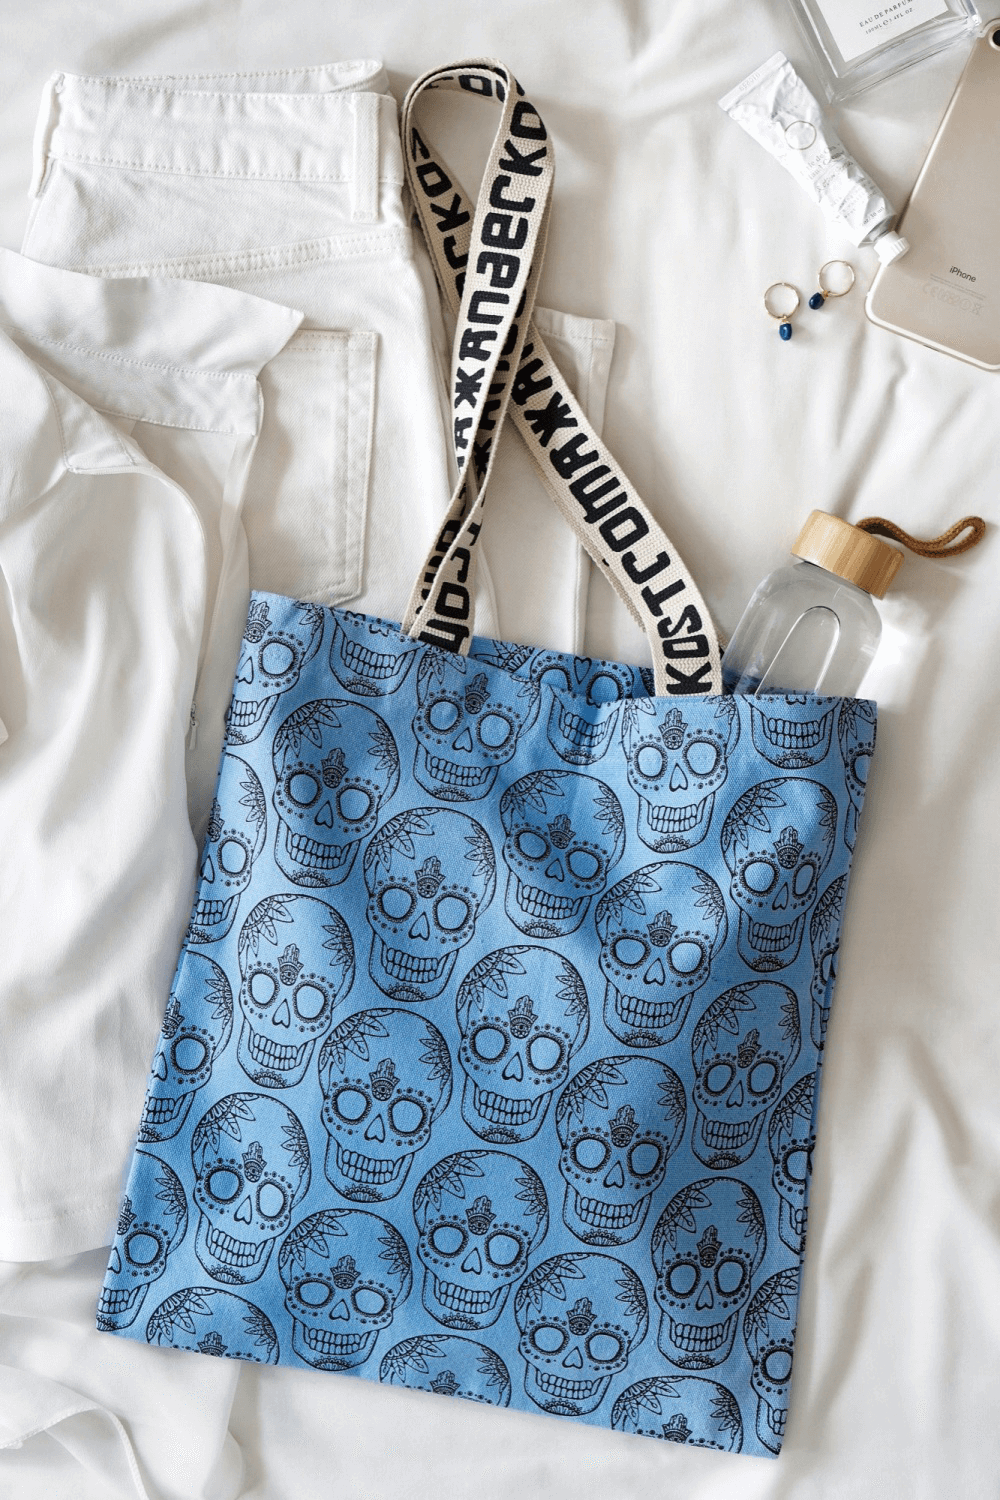 Cashmere Blue Skull Tote Bag by Xander Kostroma